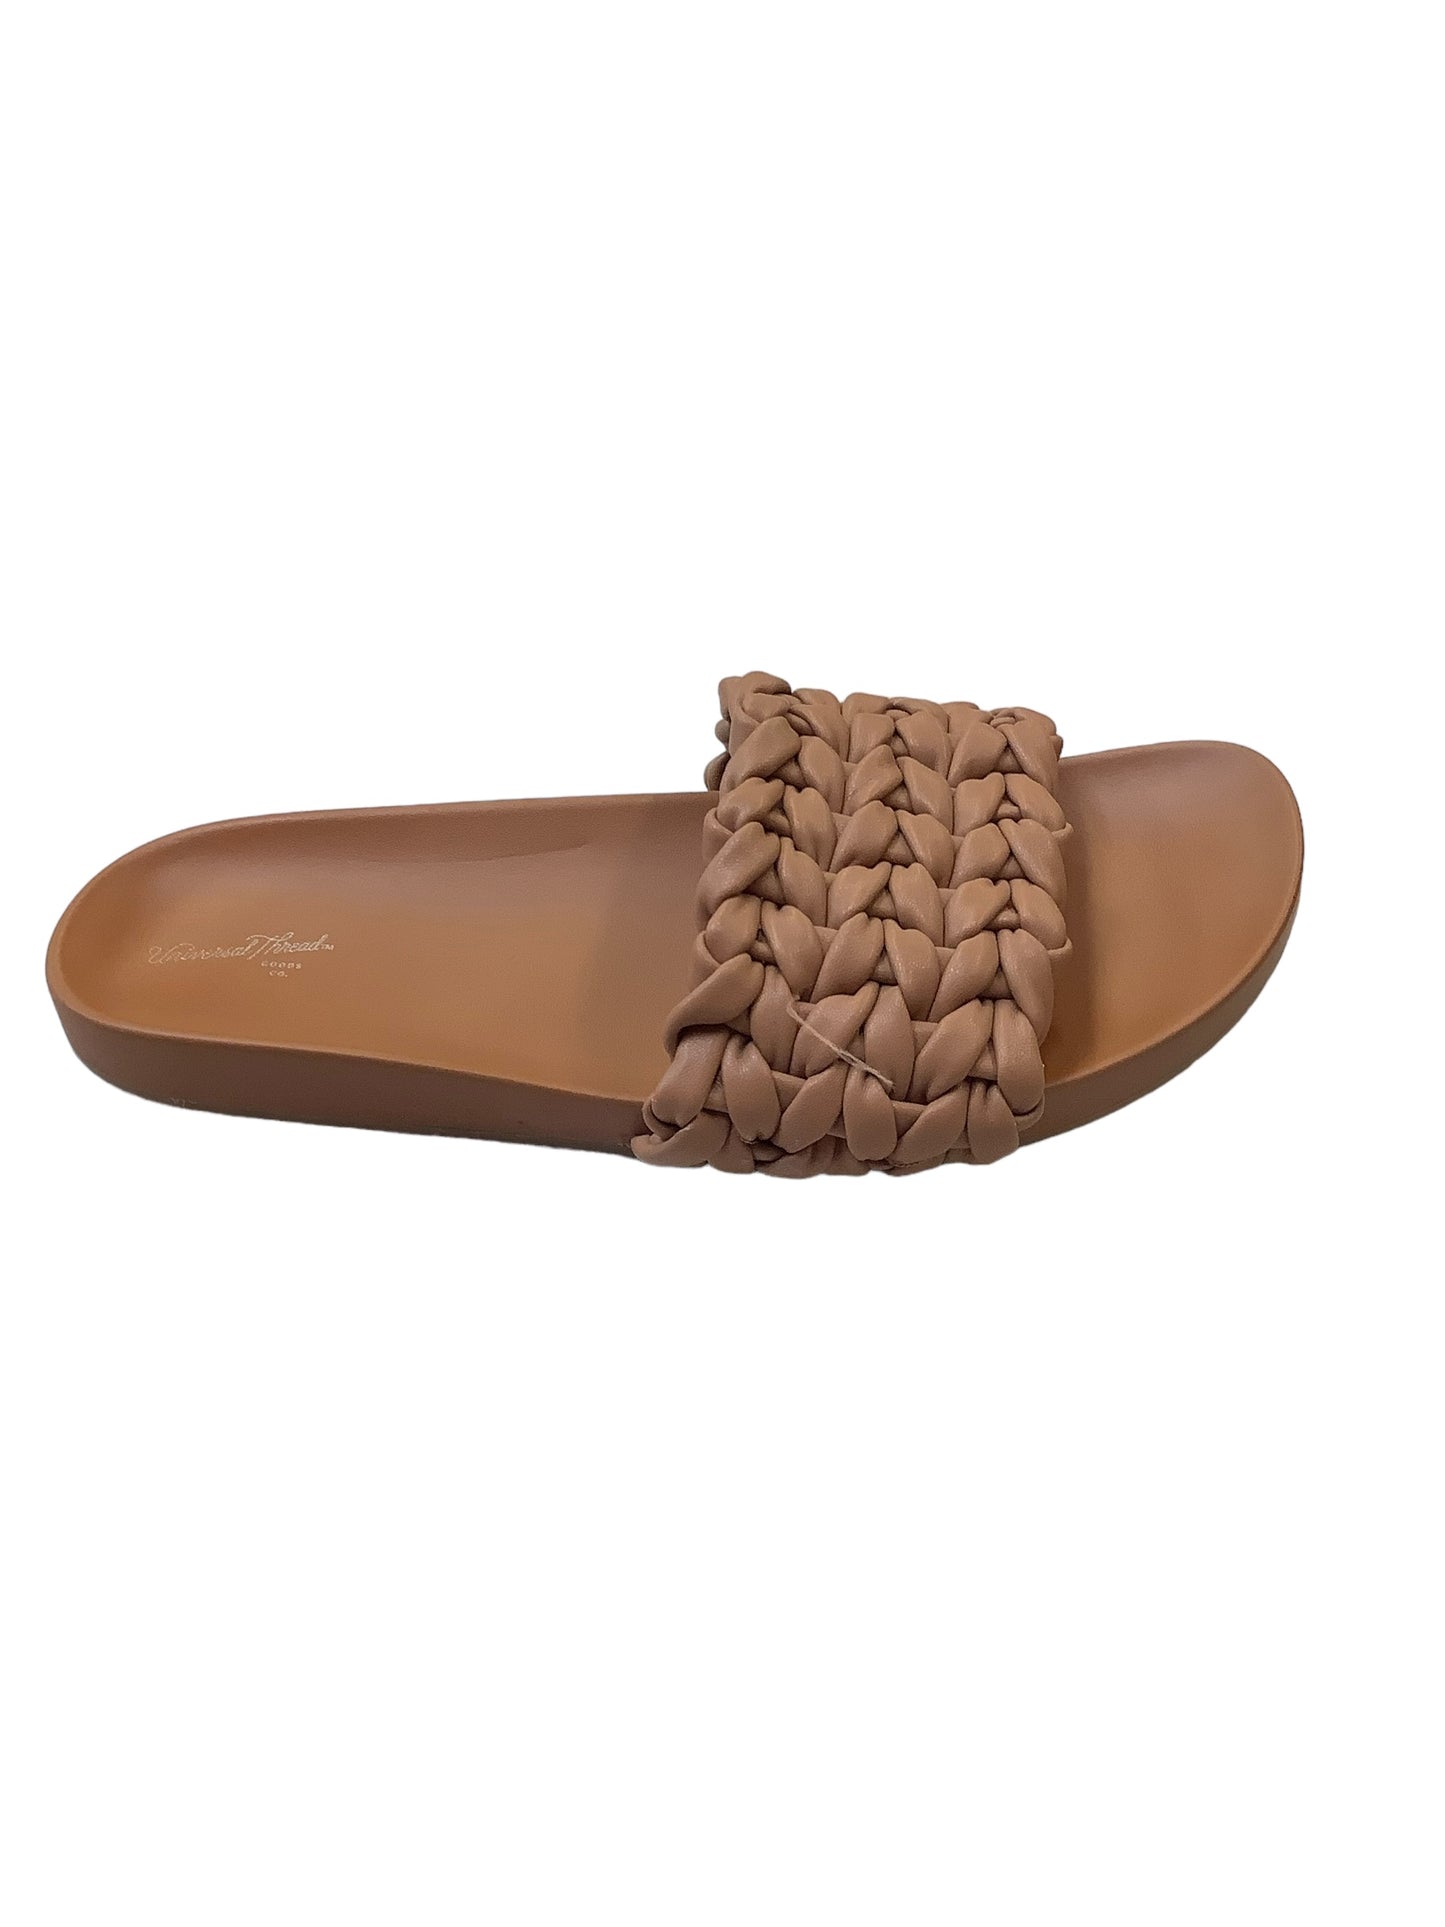 Shoes Flats Mule & Slide By Universal Thread  Size: 8